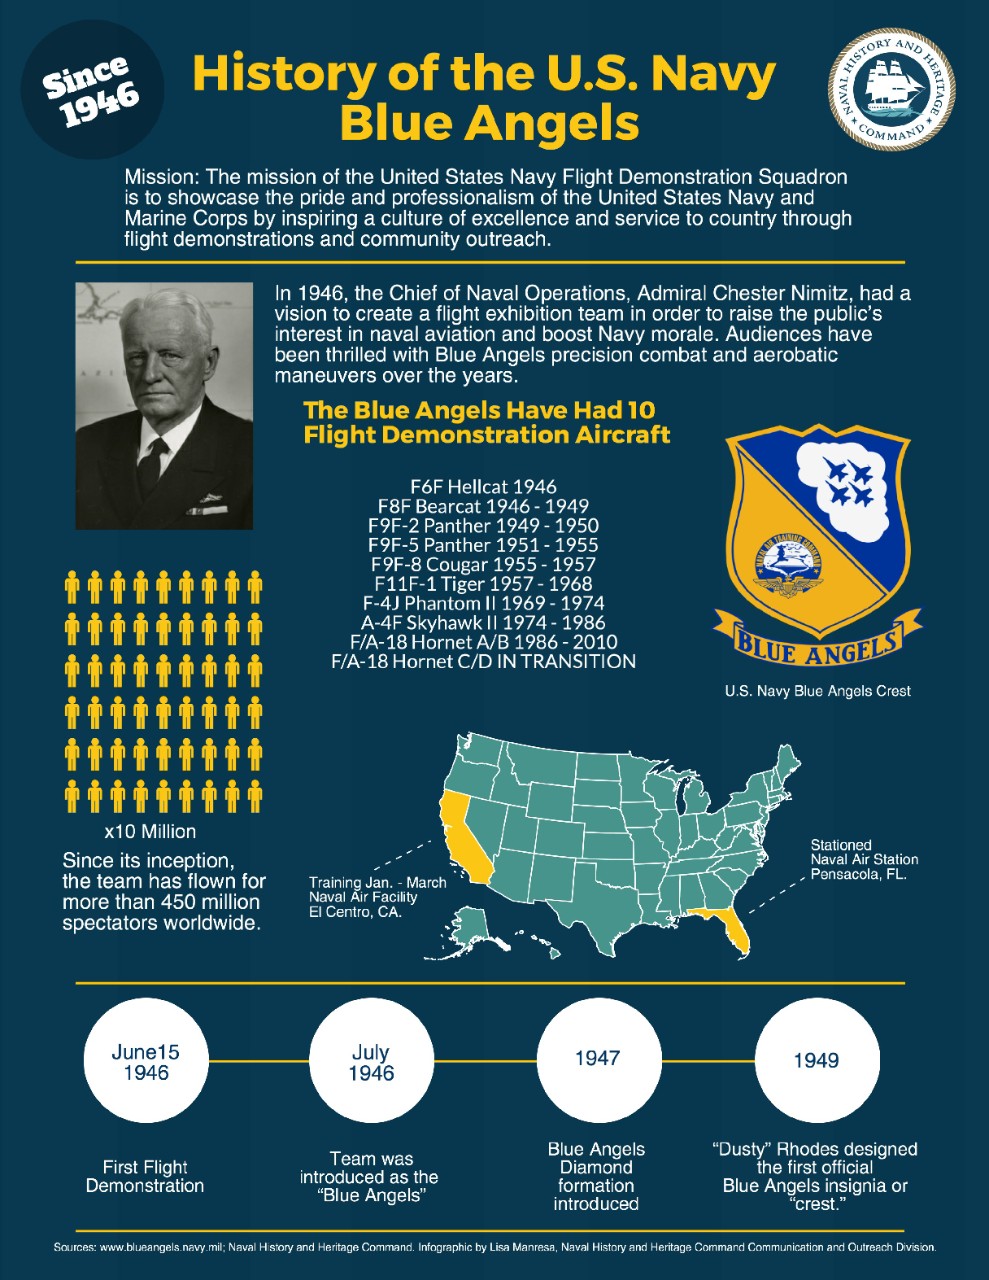 History of the Blue Angels infographic